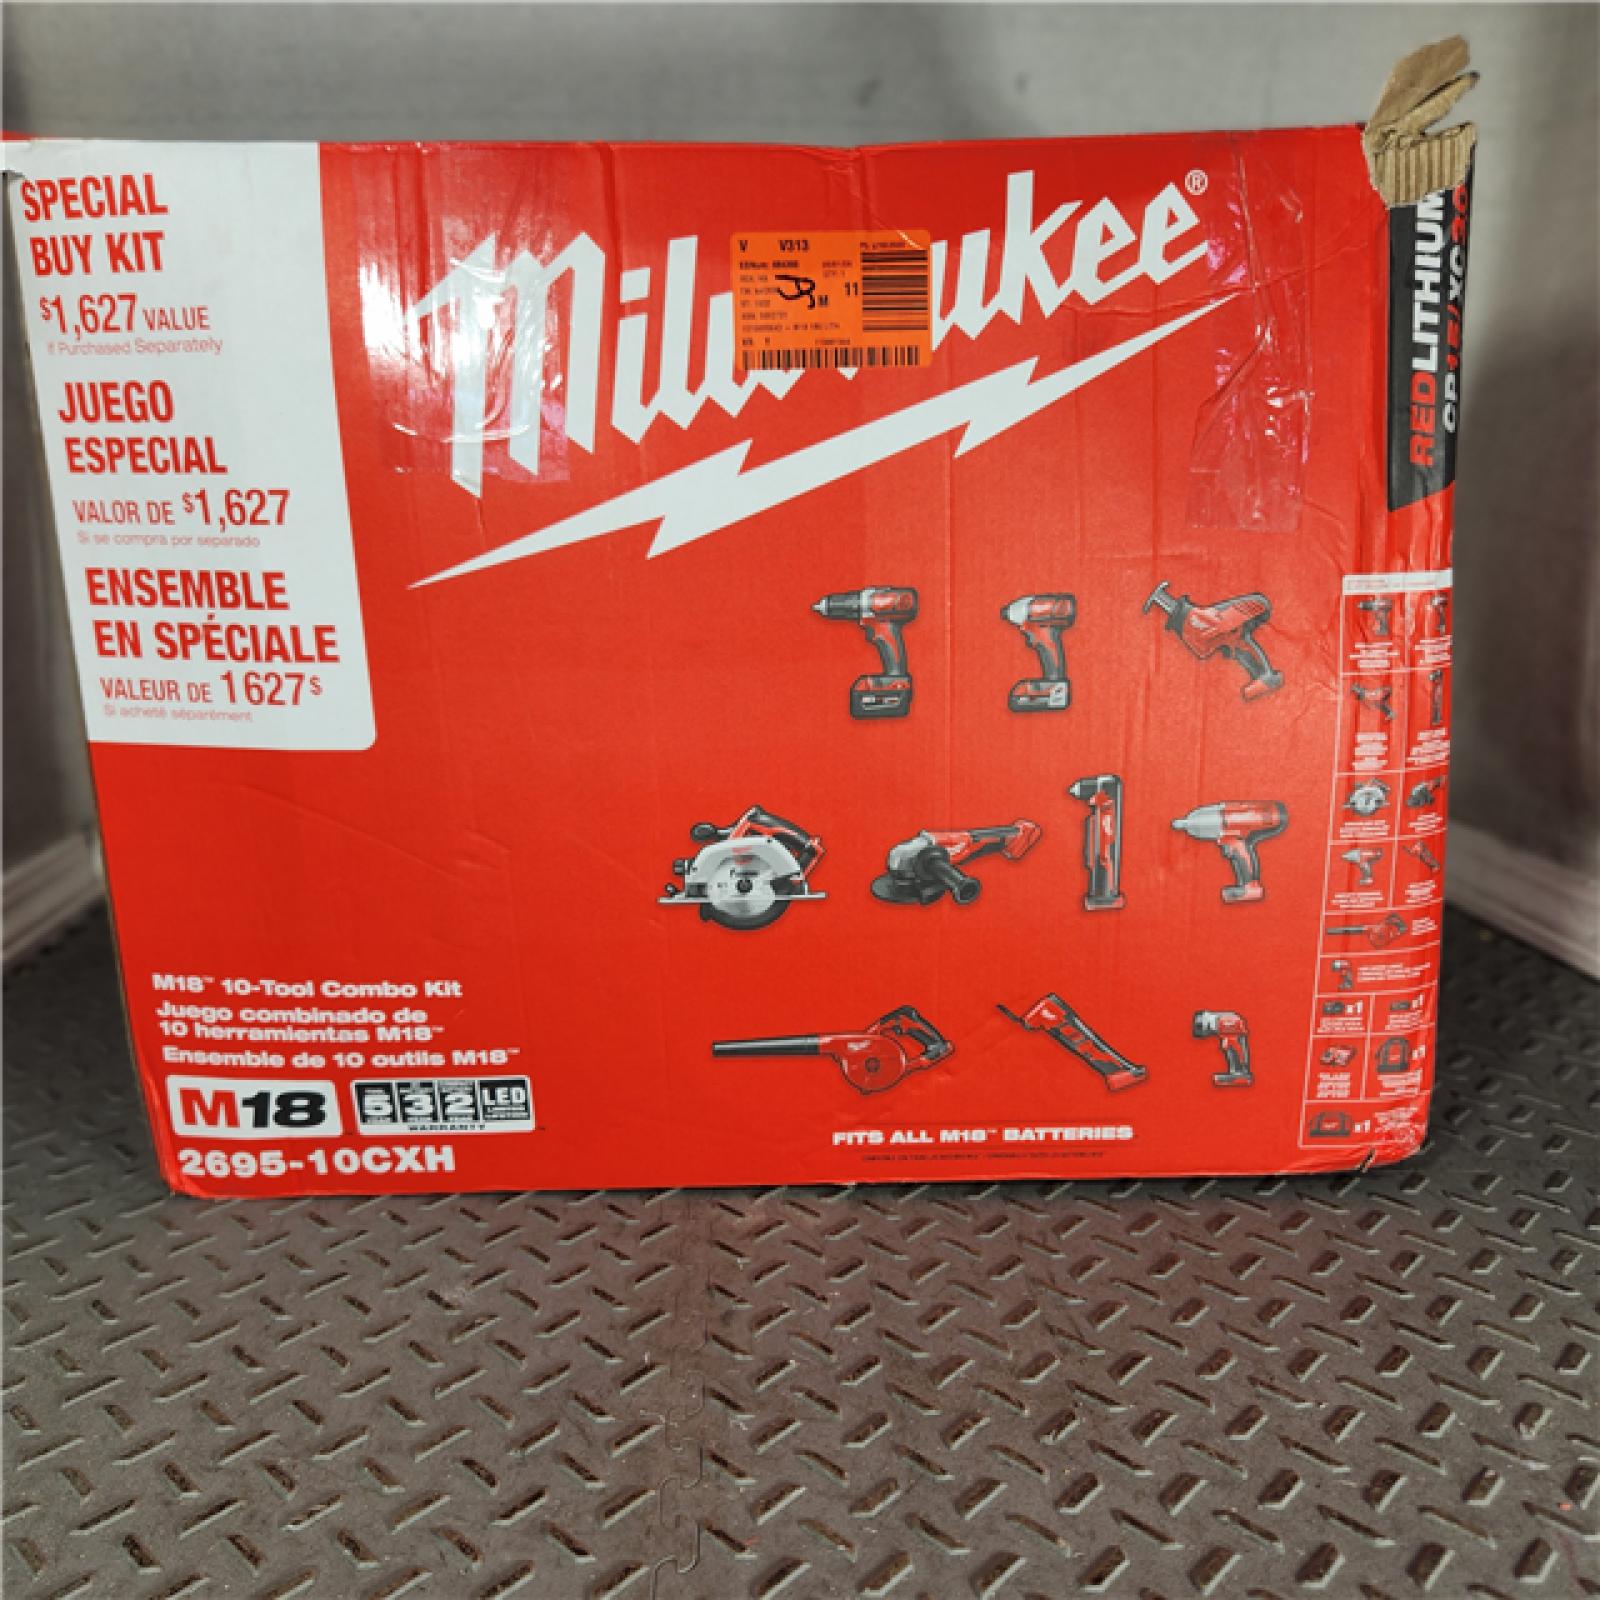 Houston location- AS-IS Milwaukee M18 10 TOOL COMBO KIT BATTERY CHARGER INCLUDED